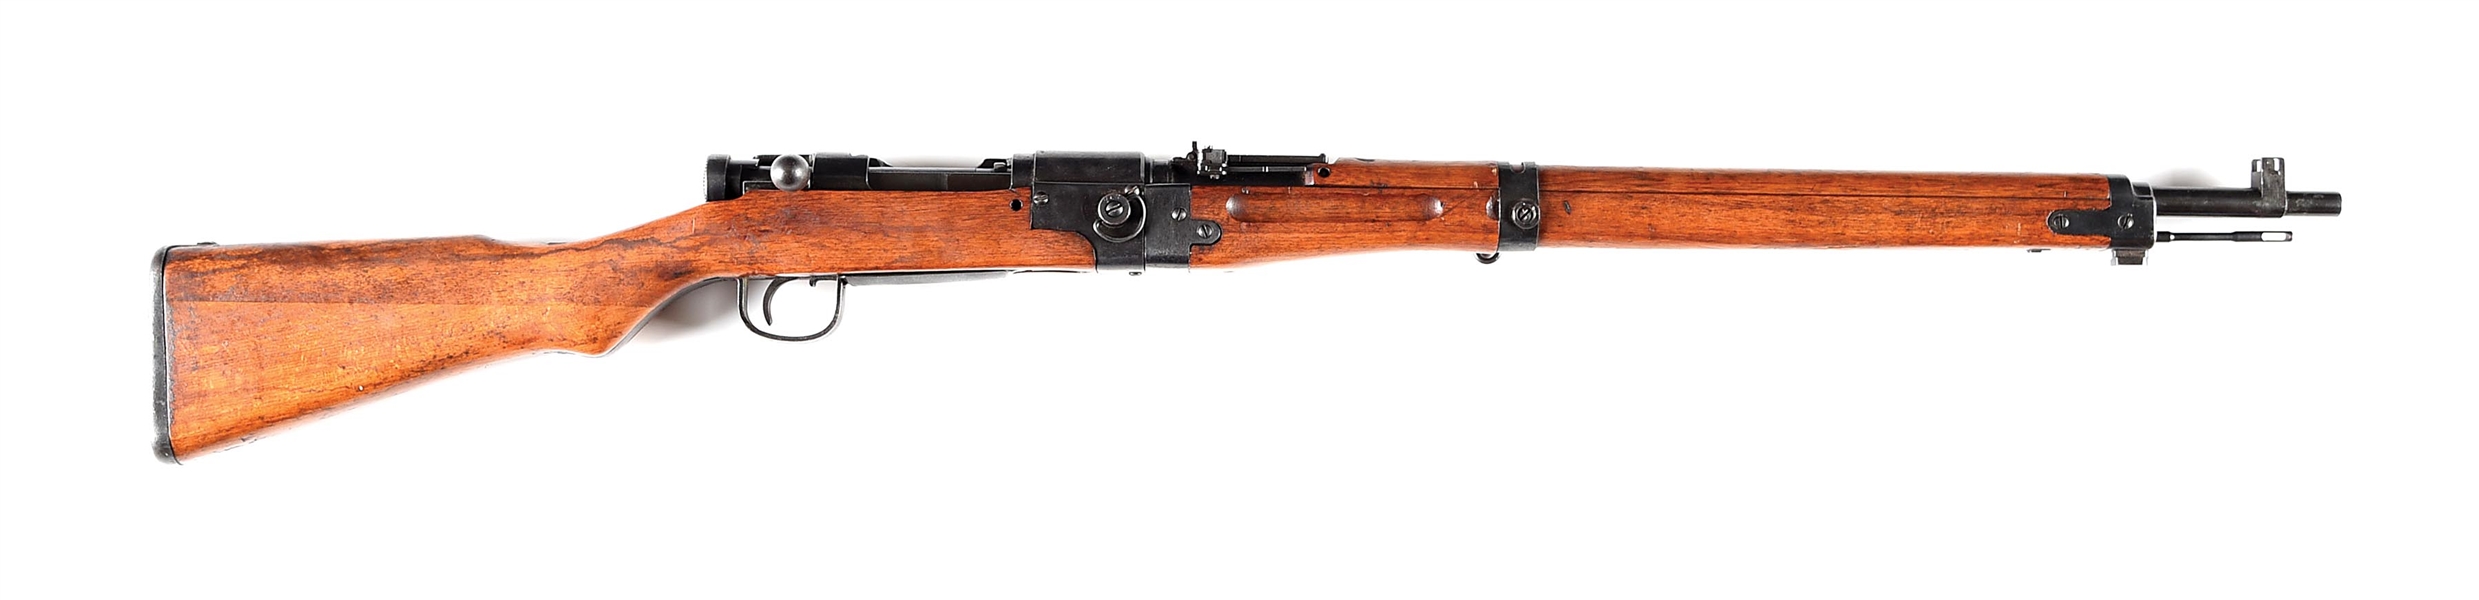 (C) VERY NICE, ALL MATCHING, IMPERIAL JAPANESE NAGOYA ARSENAL TYPE II PARATROOPER BOLT ACTION RIFLE.